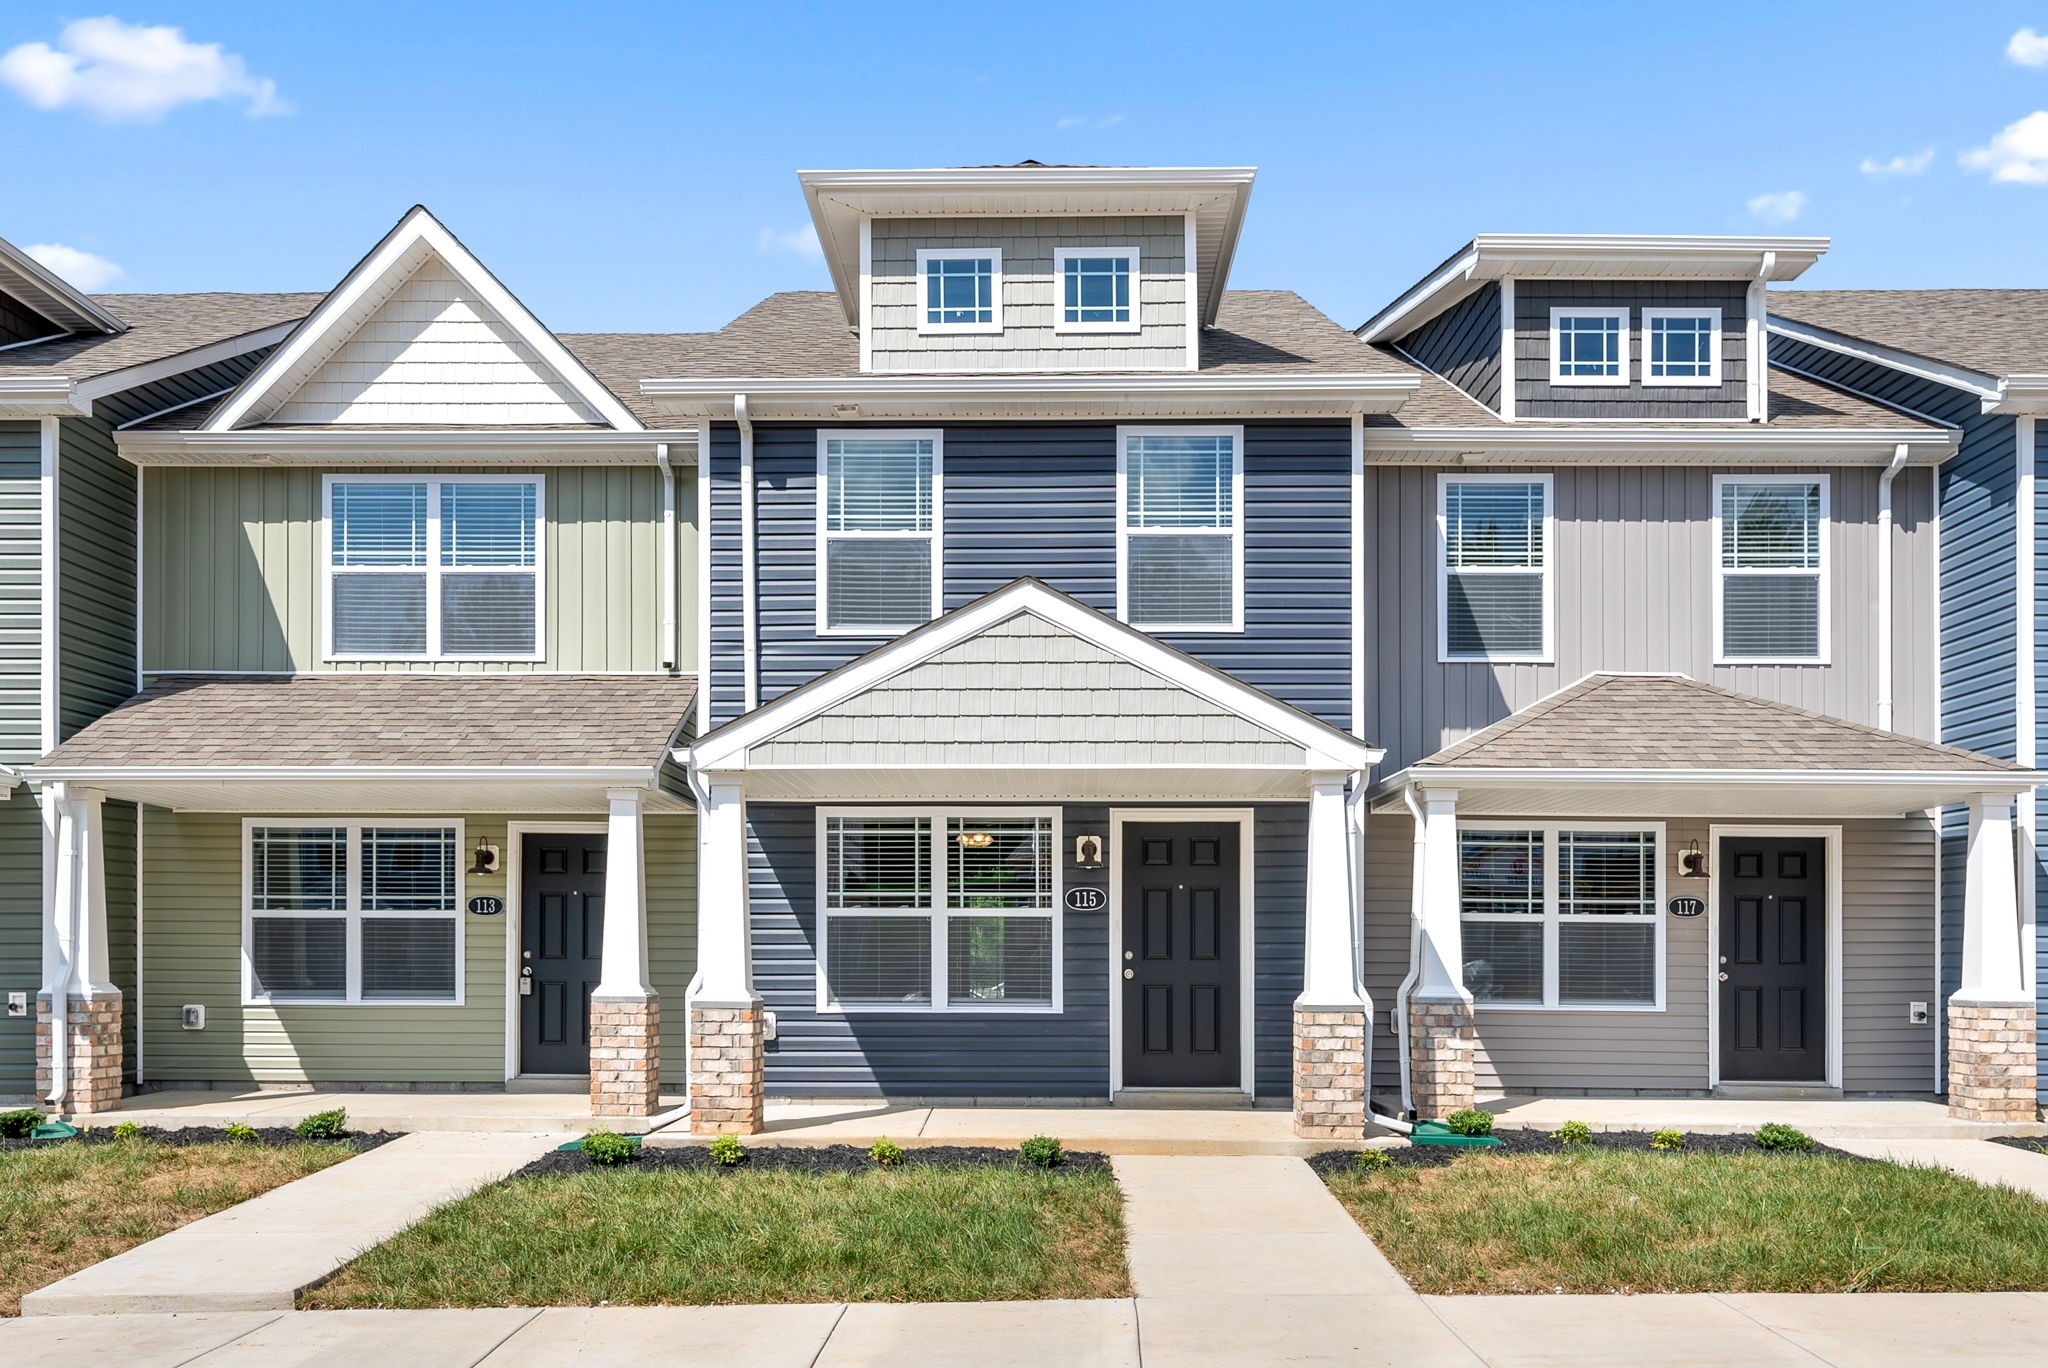 Check Out This Amazing New Construction Townhome located in the Woodland Hills Community - Stainless Steel Kitchen Appliances to include Stove, Dishwasher & Range Microwave - Grey Kitchen Cabinets - Granite Counters in the Kitchen are Standard Selection - LVT Floors Installed on Main Level